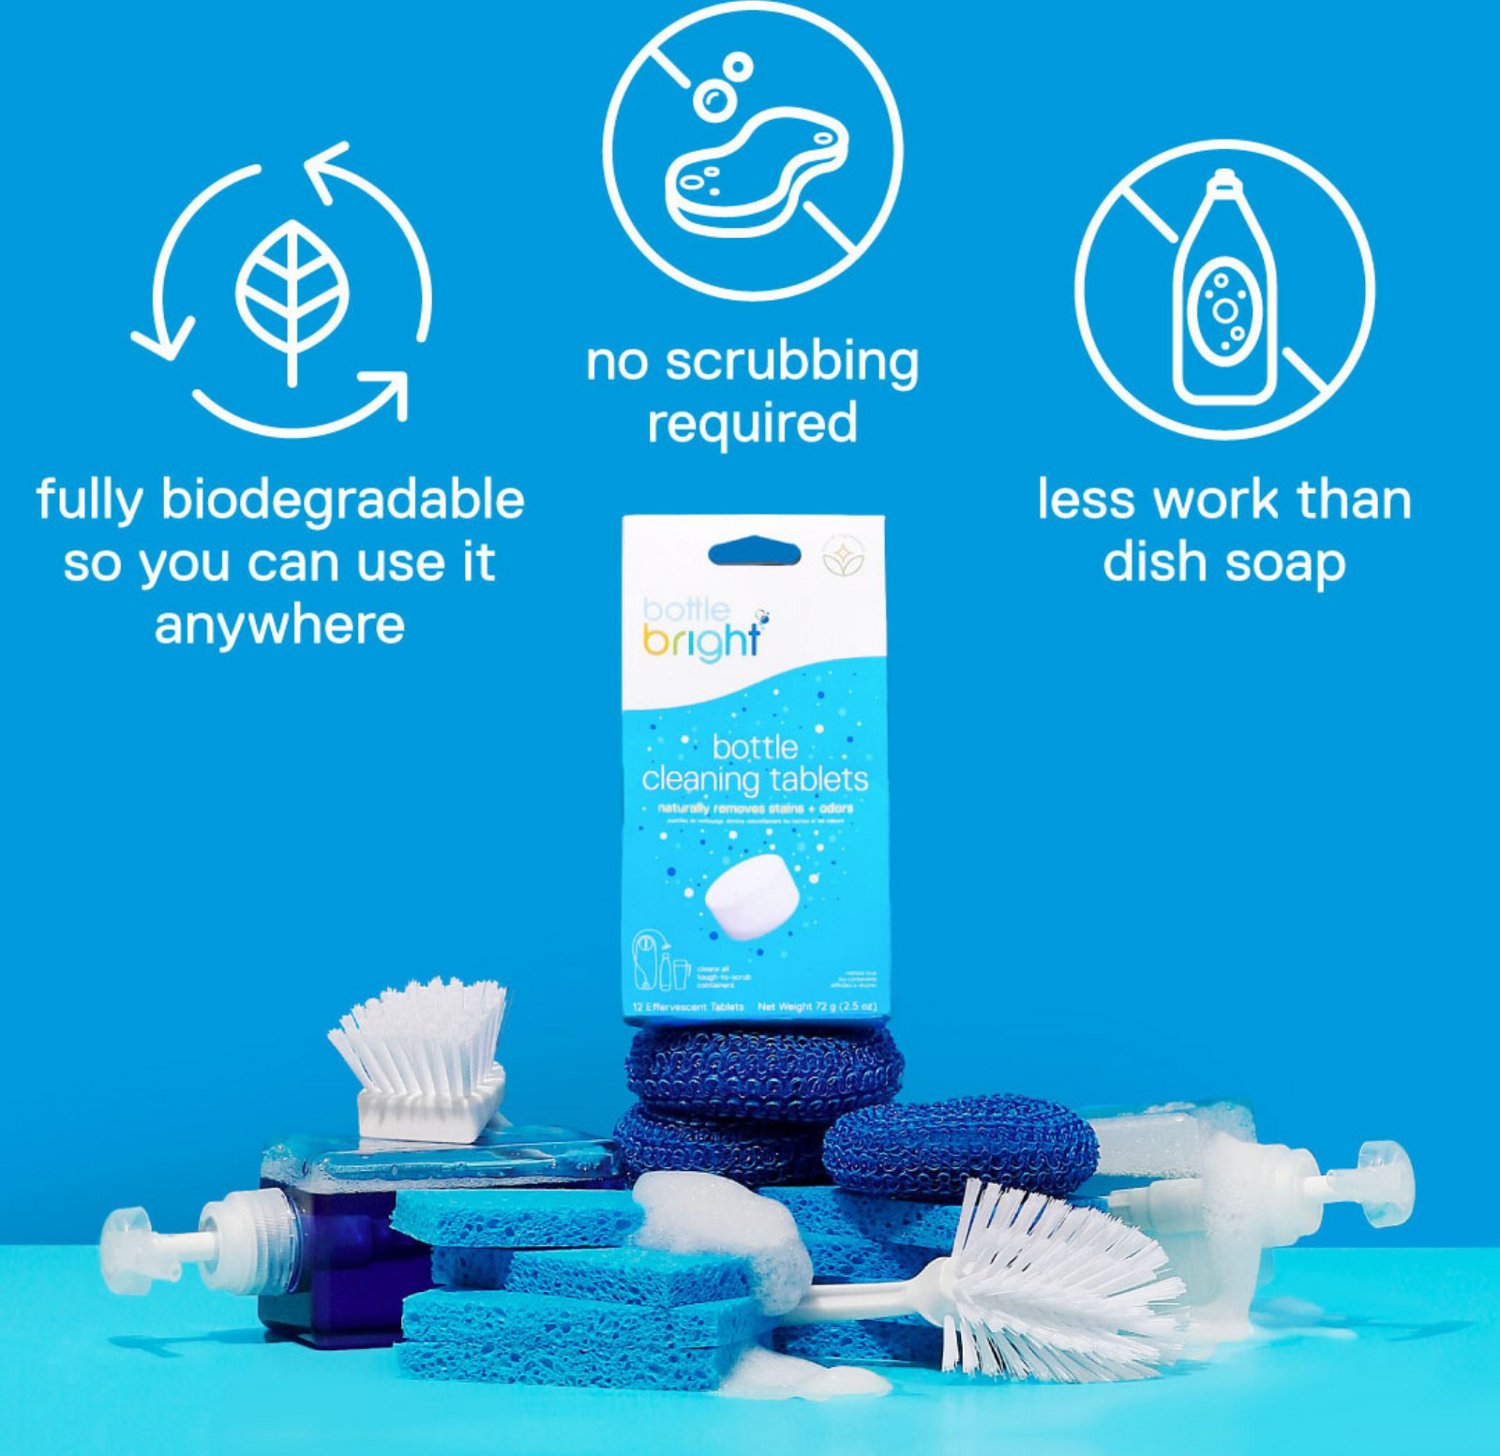 Bottle Bright® Cleaning Tablets